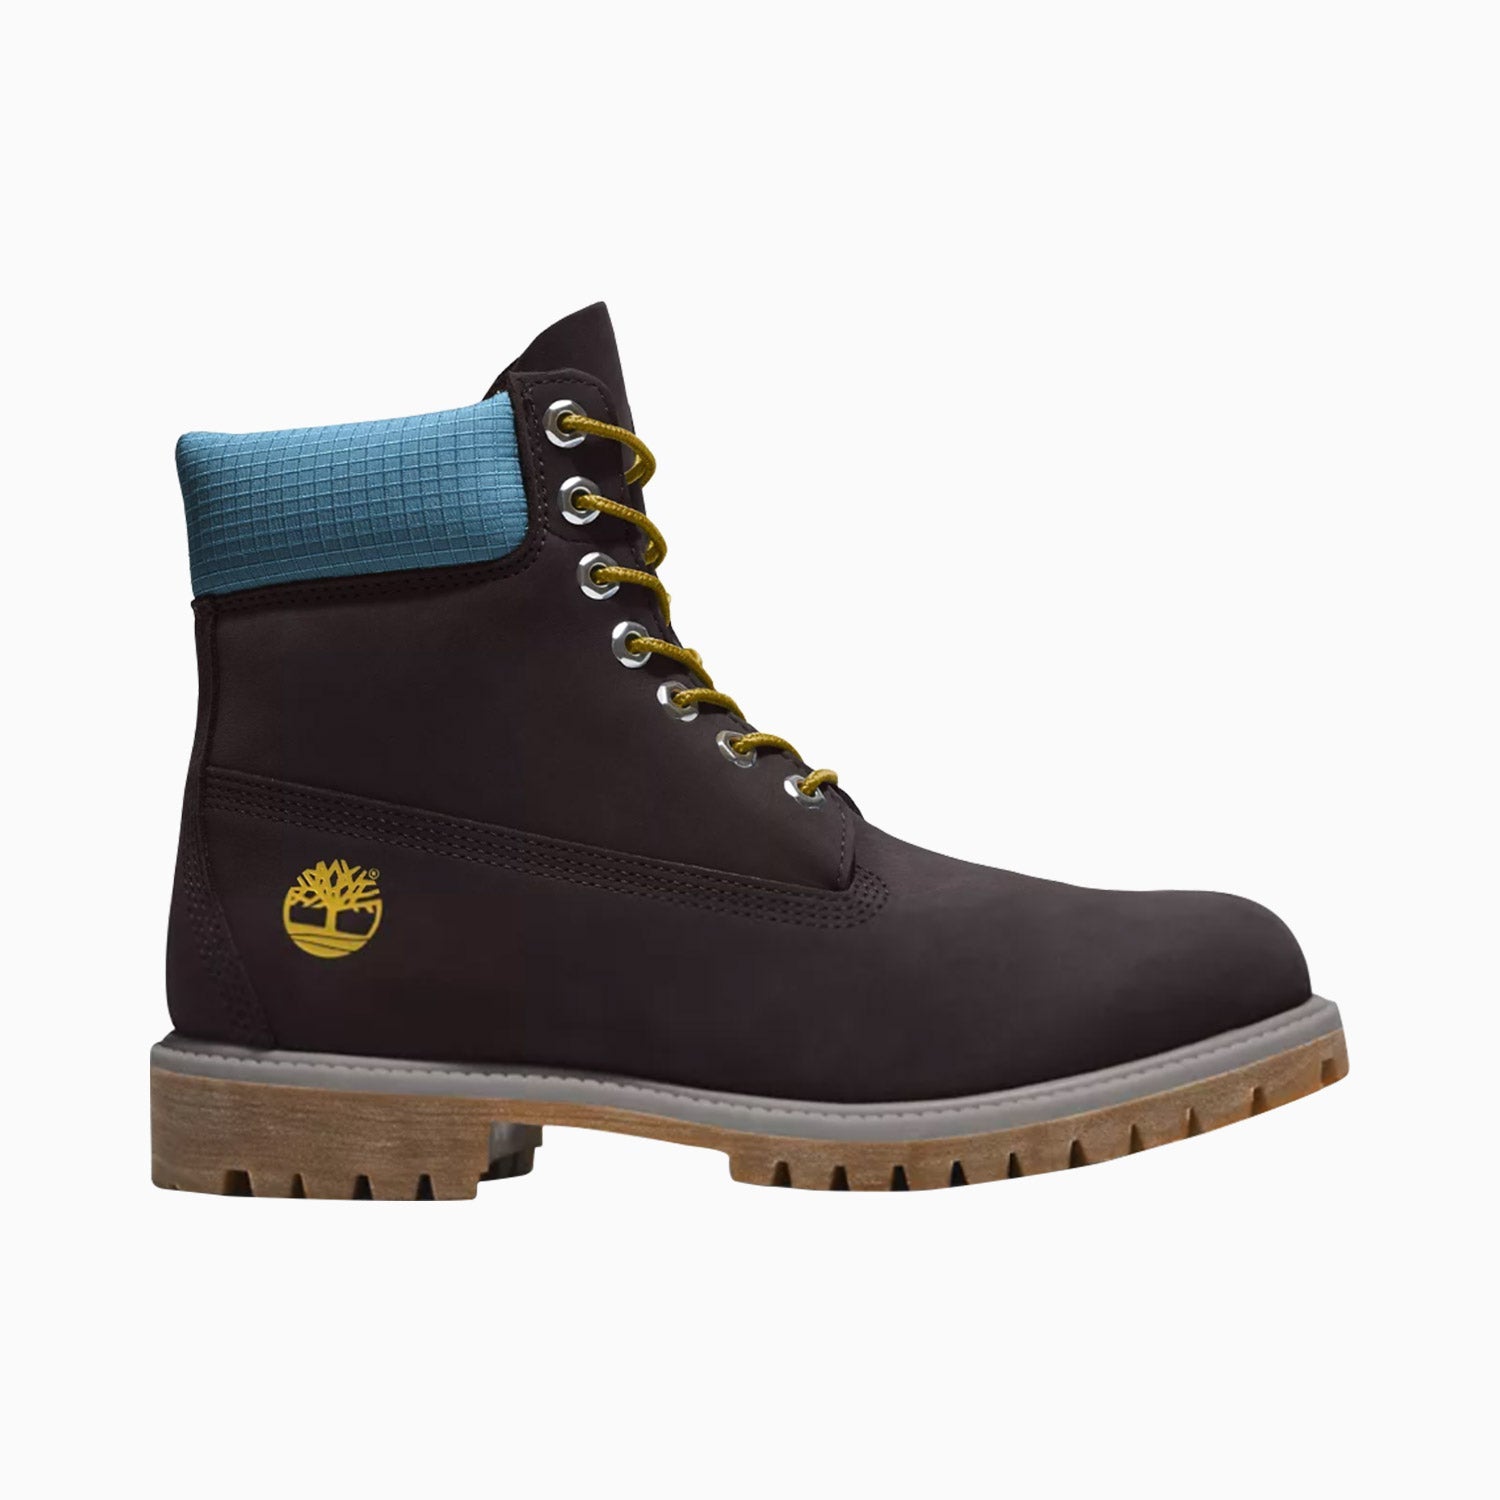 Timberland Men's Premium 6-Inch Waterproof Boot - Color: Black Blue - Tops and Bottoms USA -